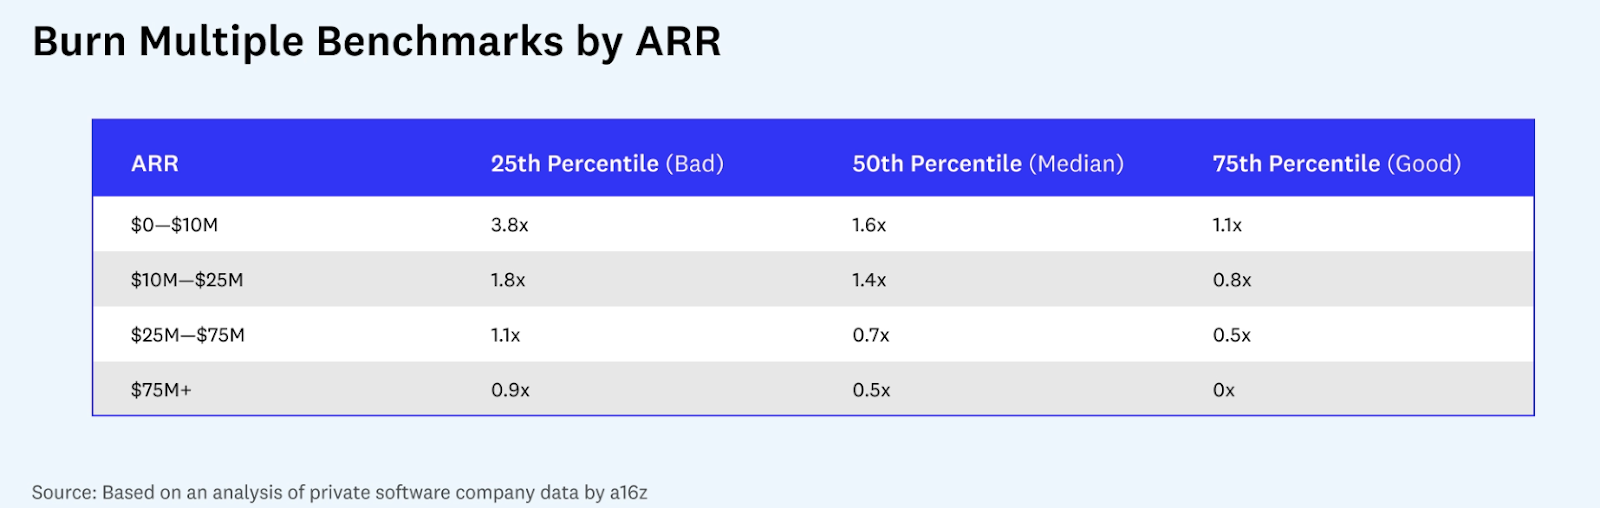 burn multiple benchmarks by ARR from a16z